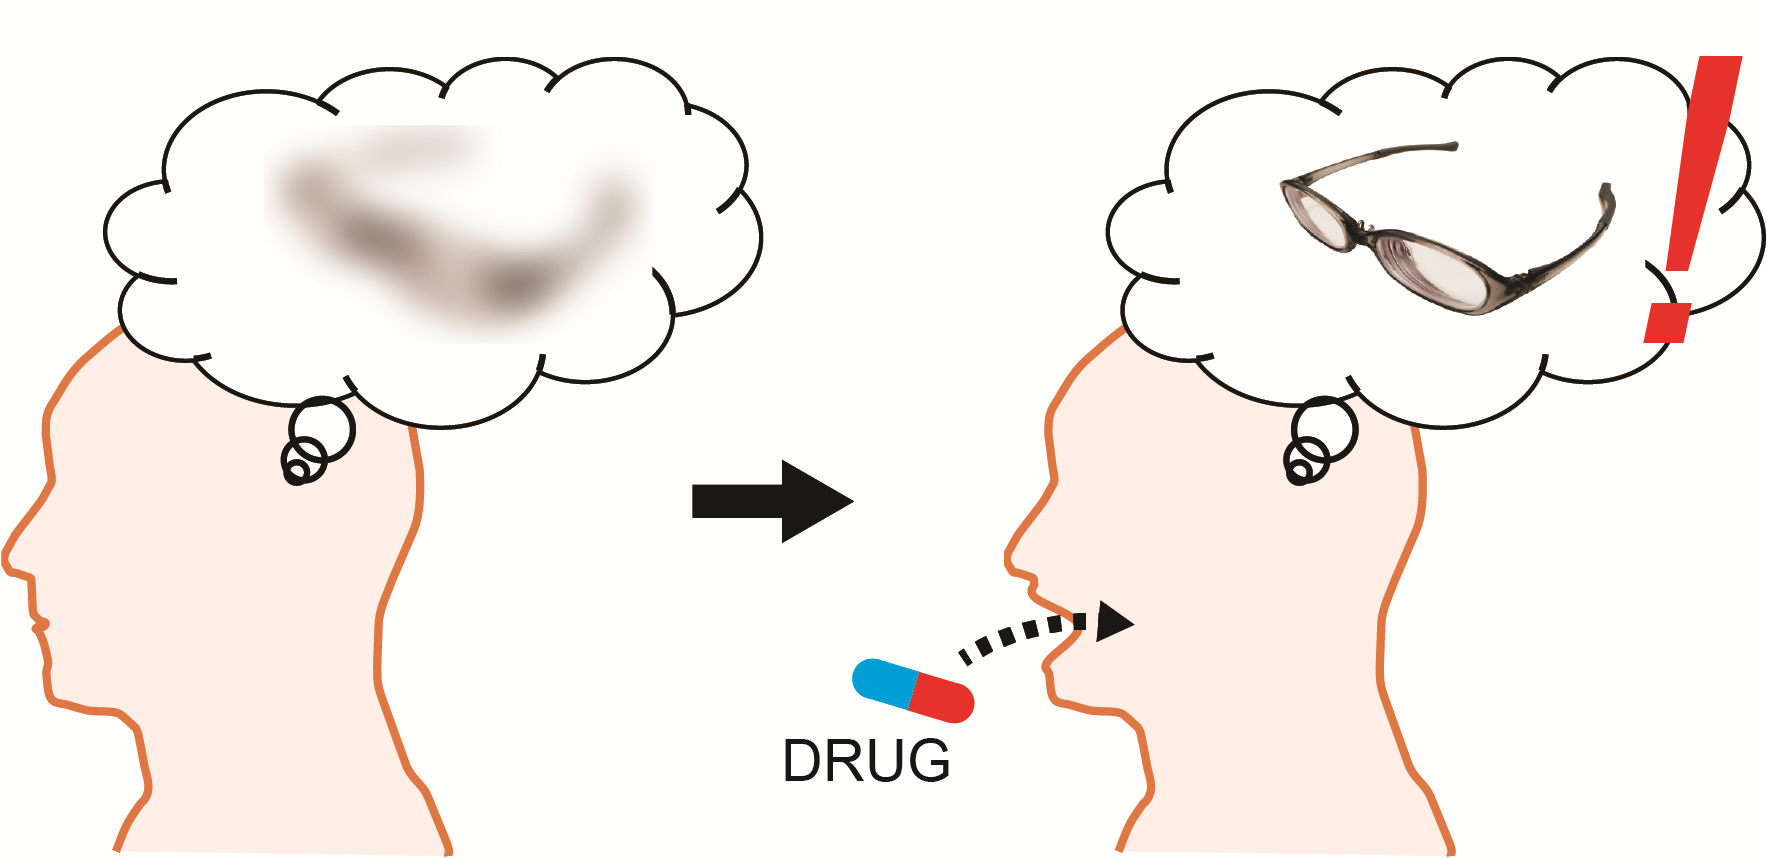 An illustration of a person on the left with a thought cloud containing a fuzzy object and a person on the right taking a pill with a thought cloud containing a clear image of a pair of glasses